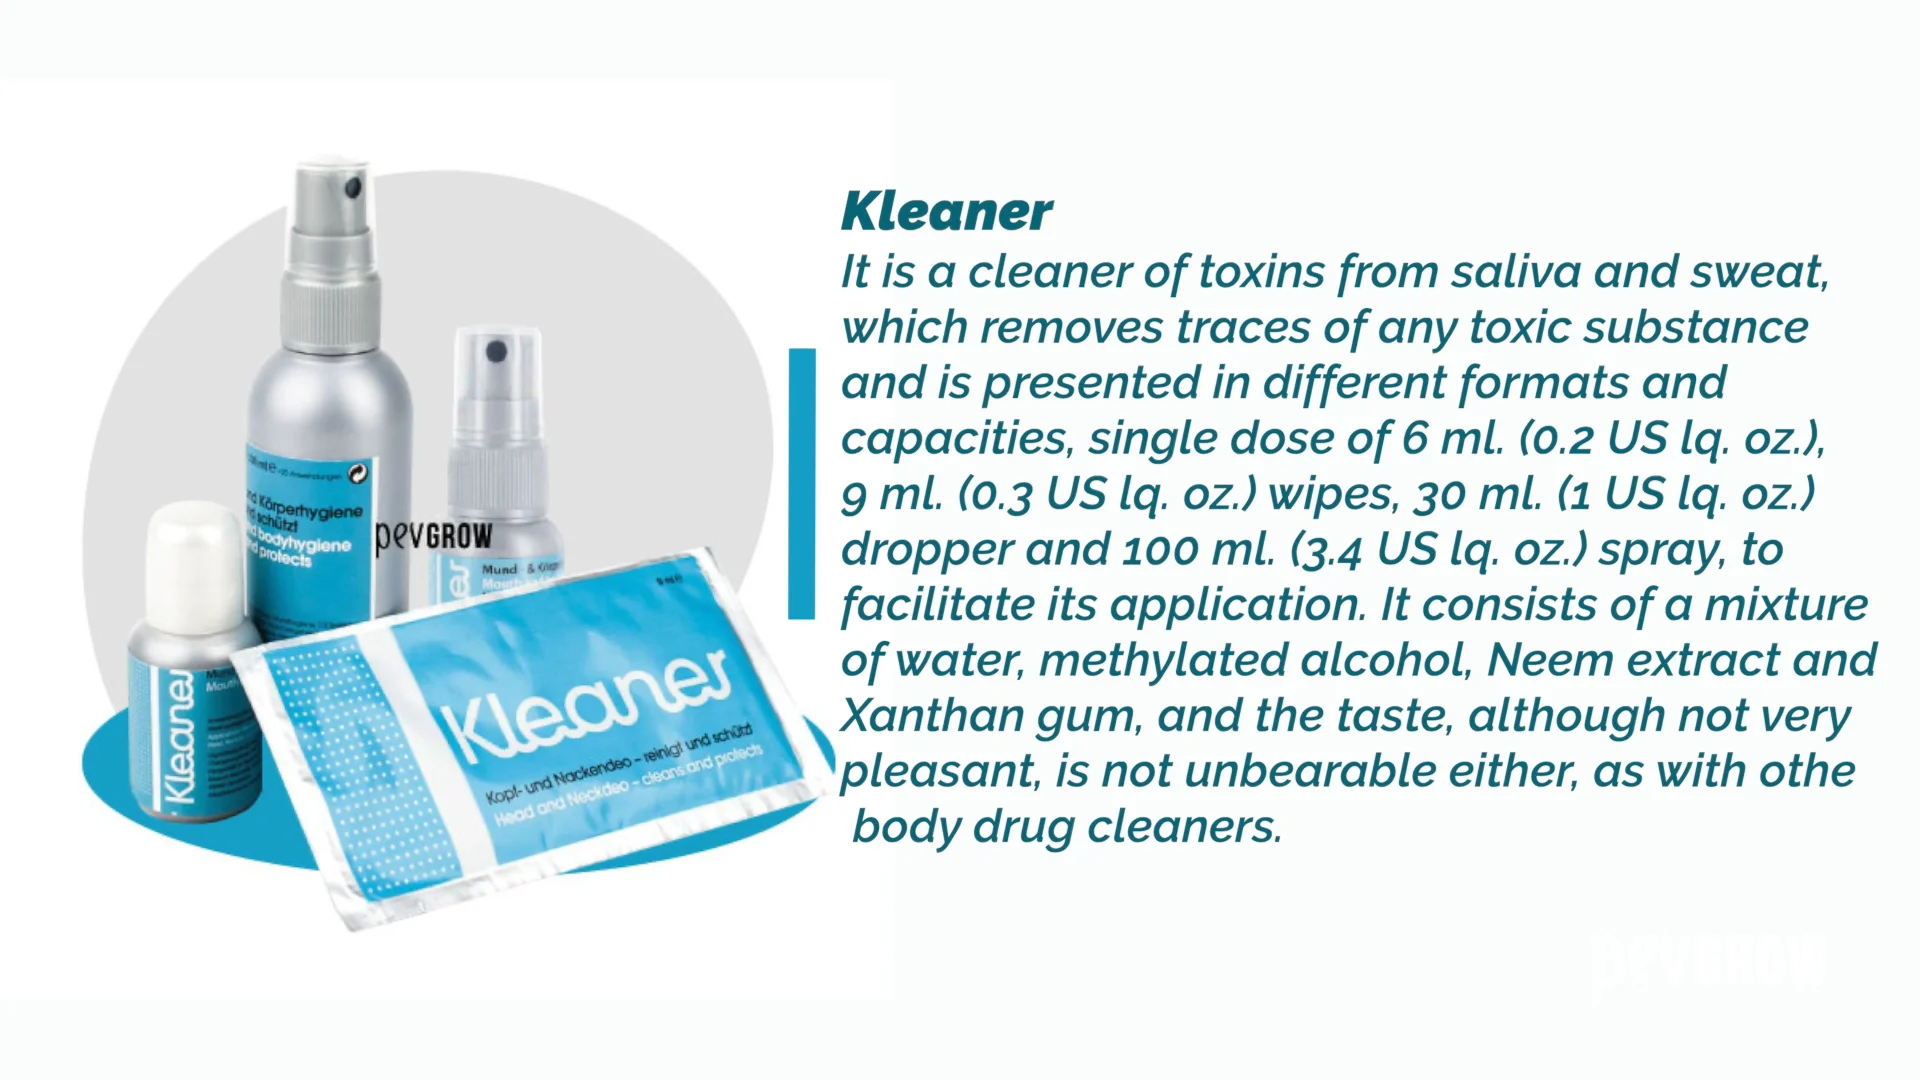 Sale of Kleaner, toxin cleaner.